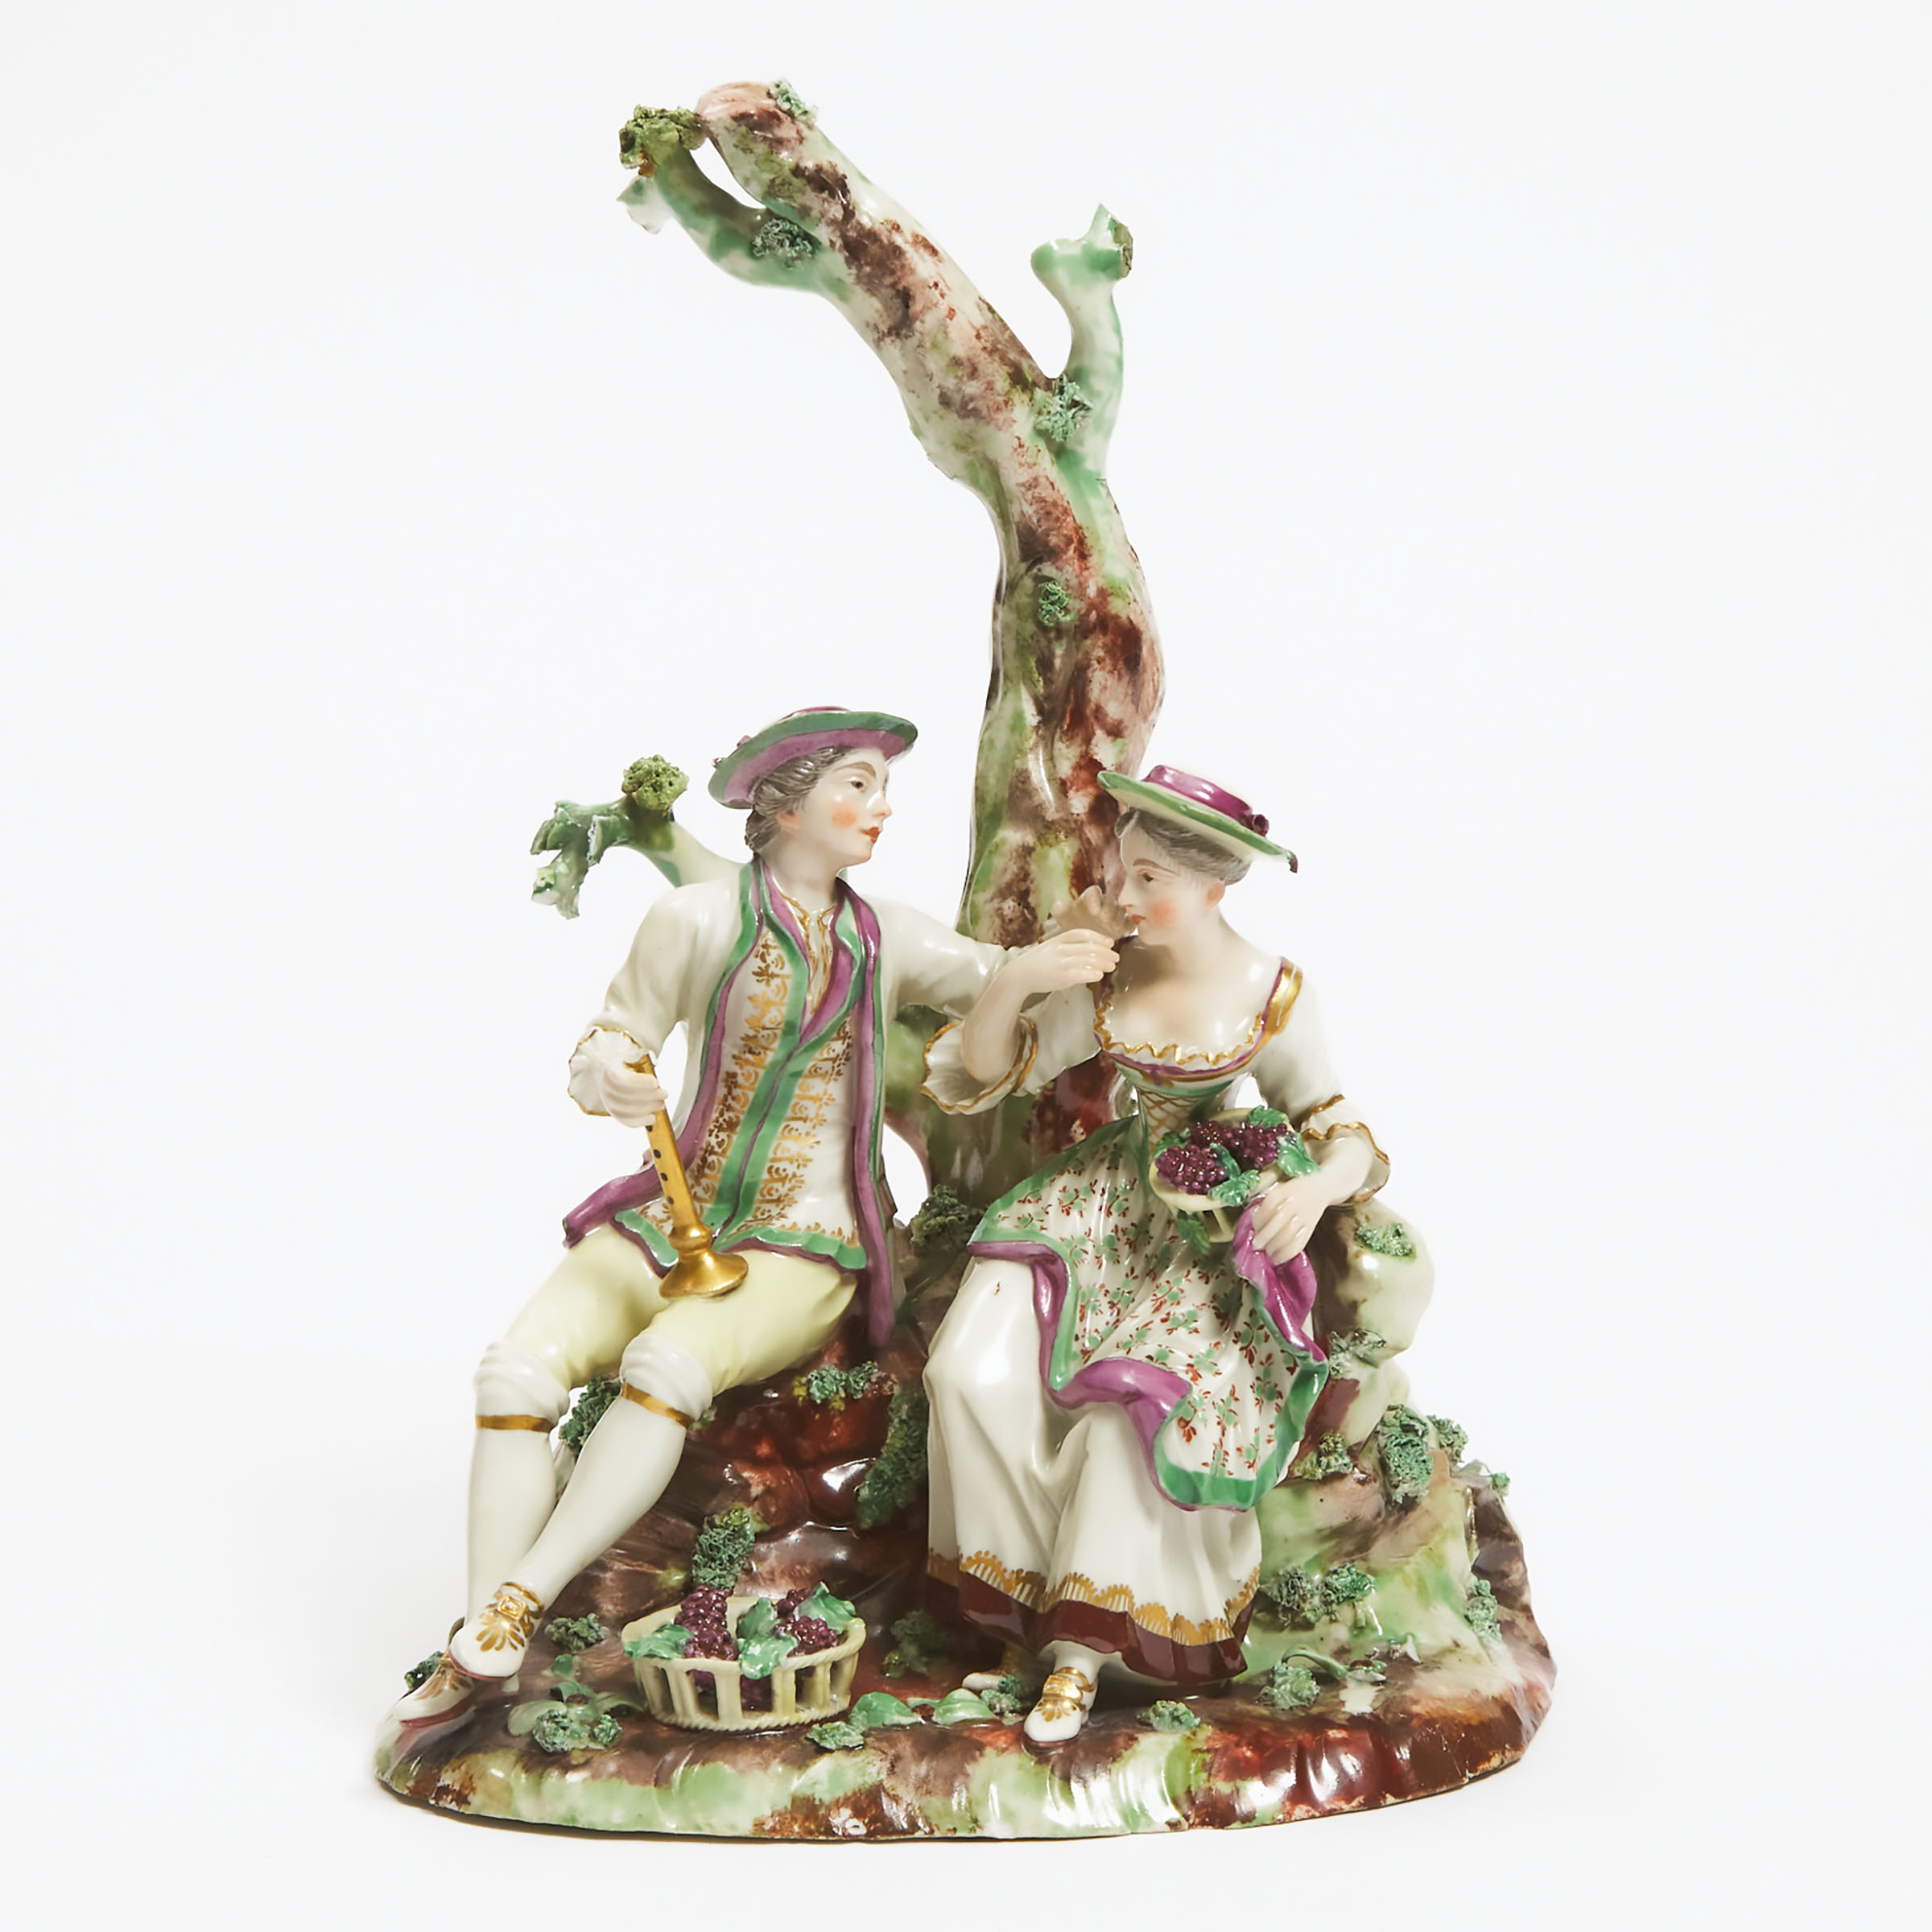 Ludwigsburg Allegorical Group of Autumn, late 18th century